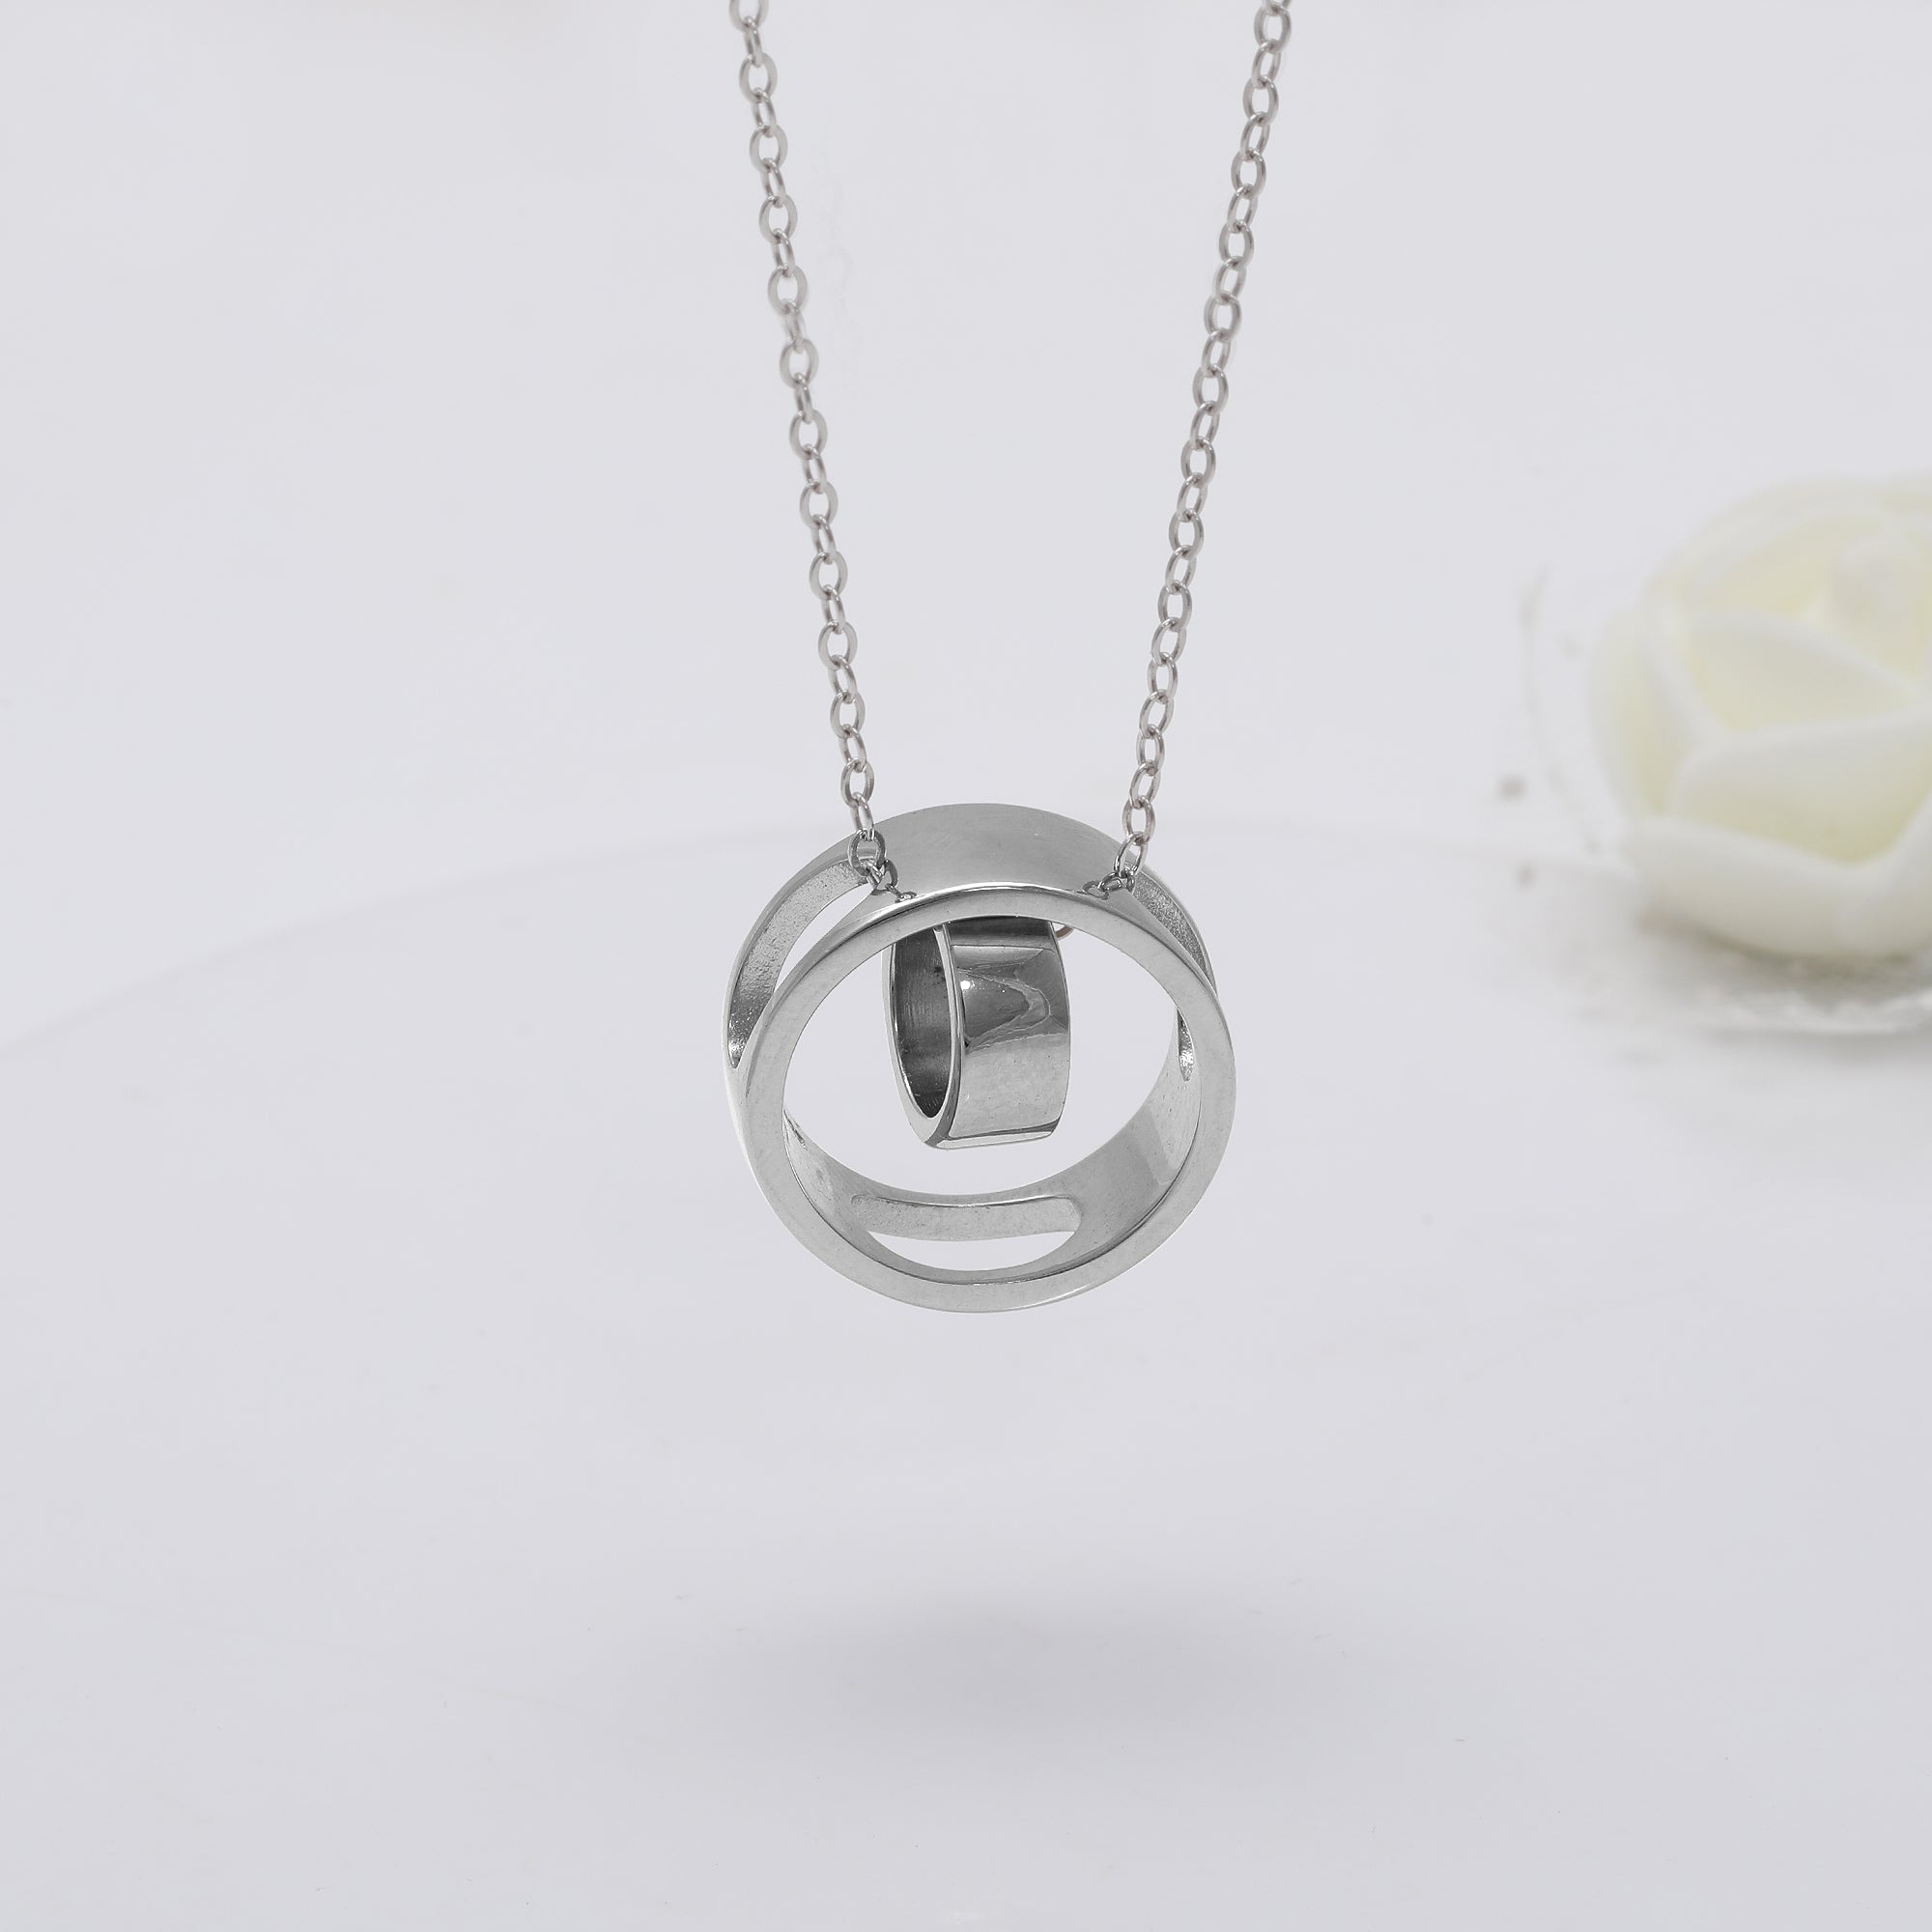 Buy Interlocking Circle with Name and Date Customized Name Necklace Pendants  | yourPrint